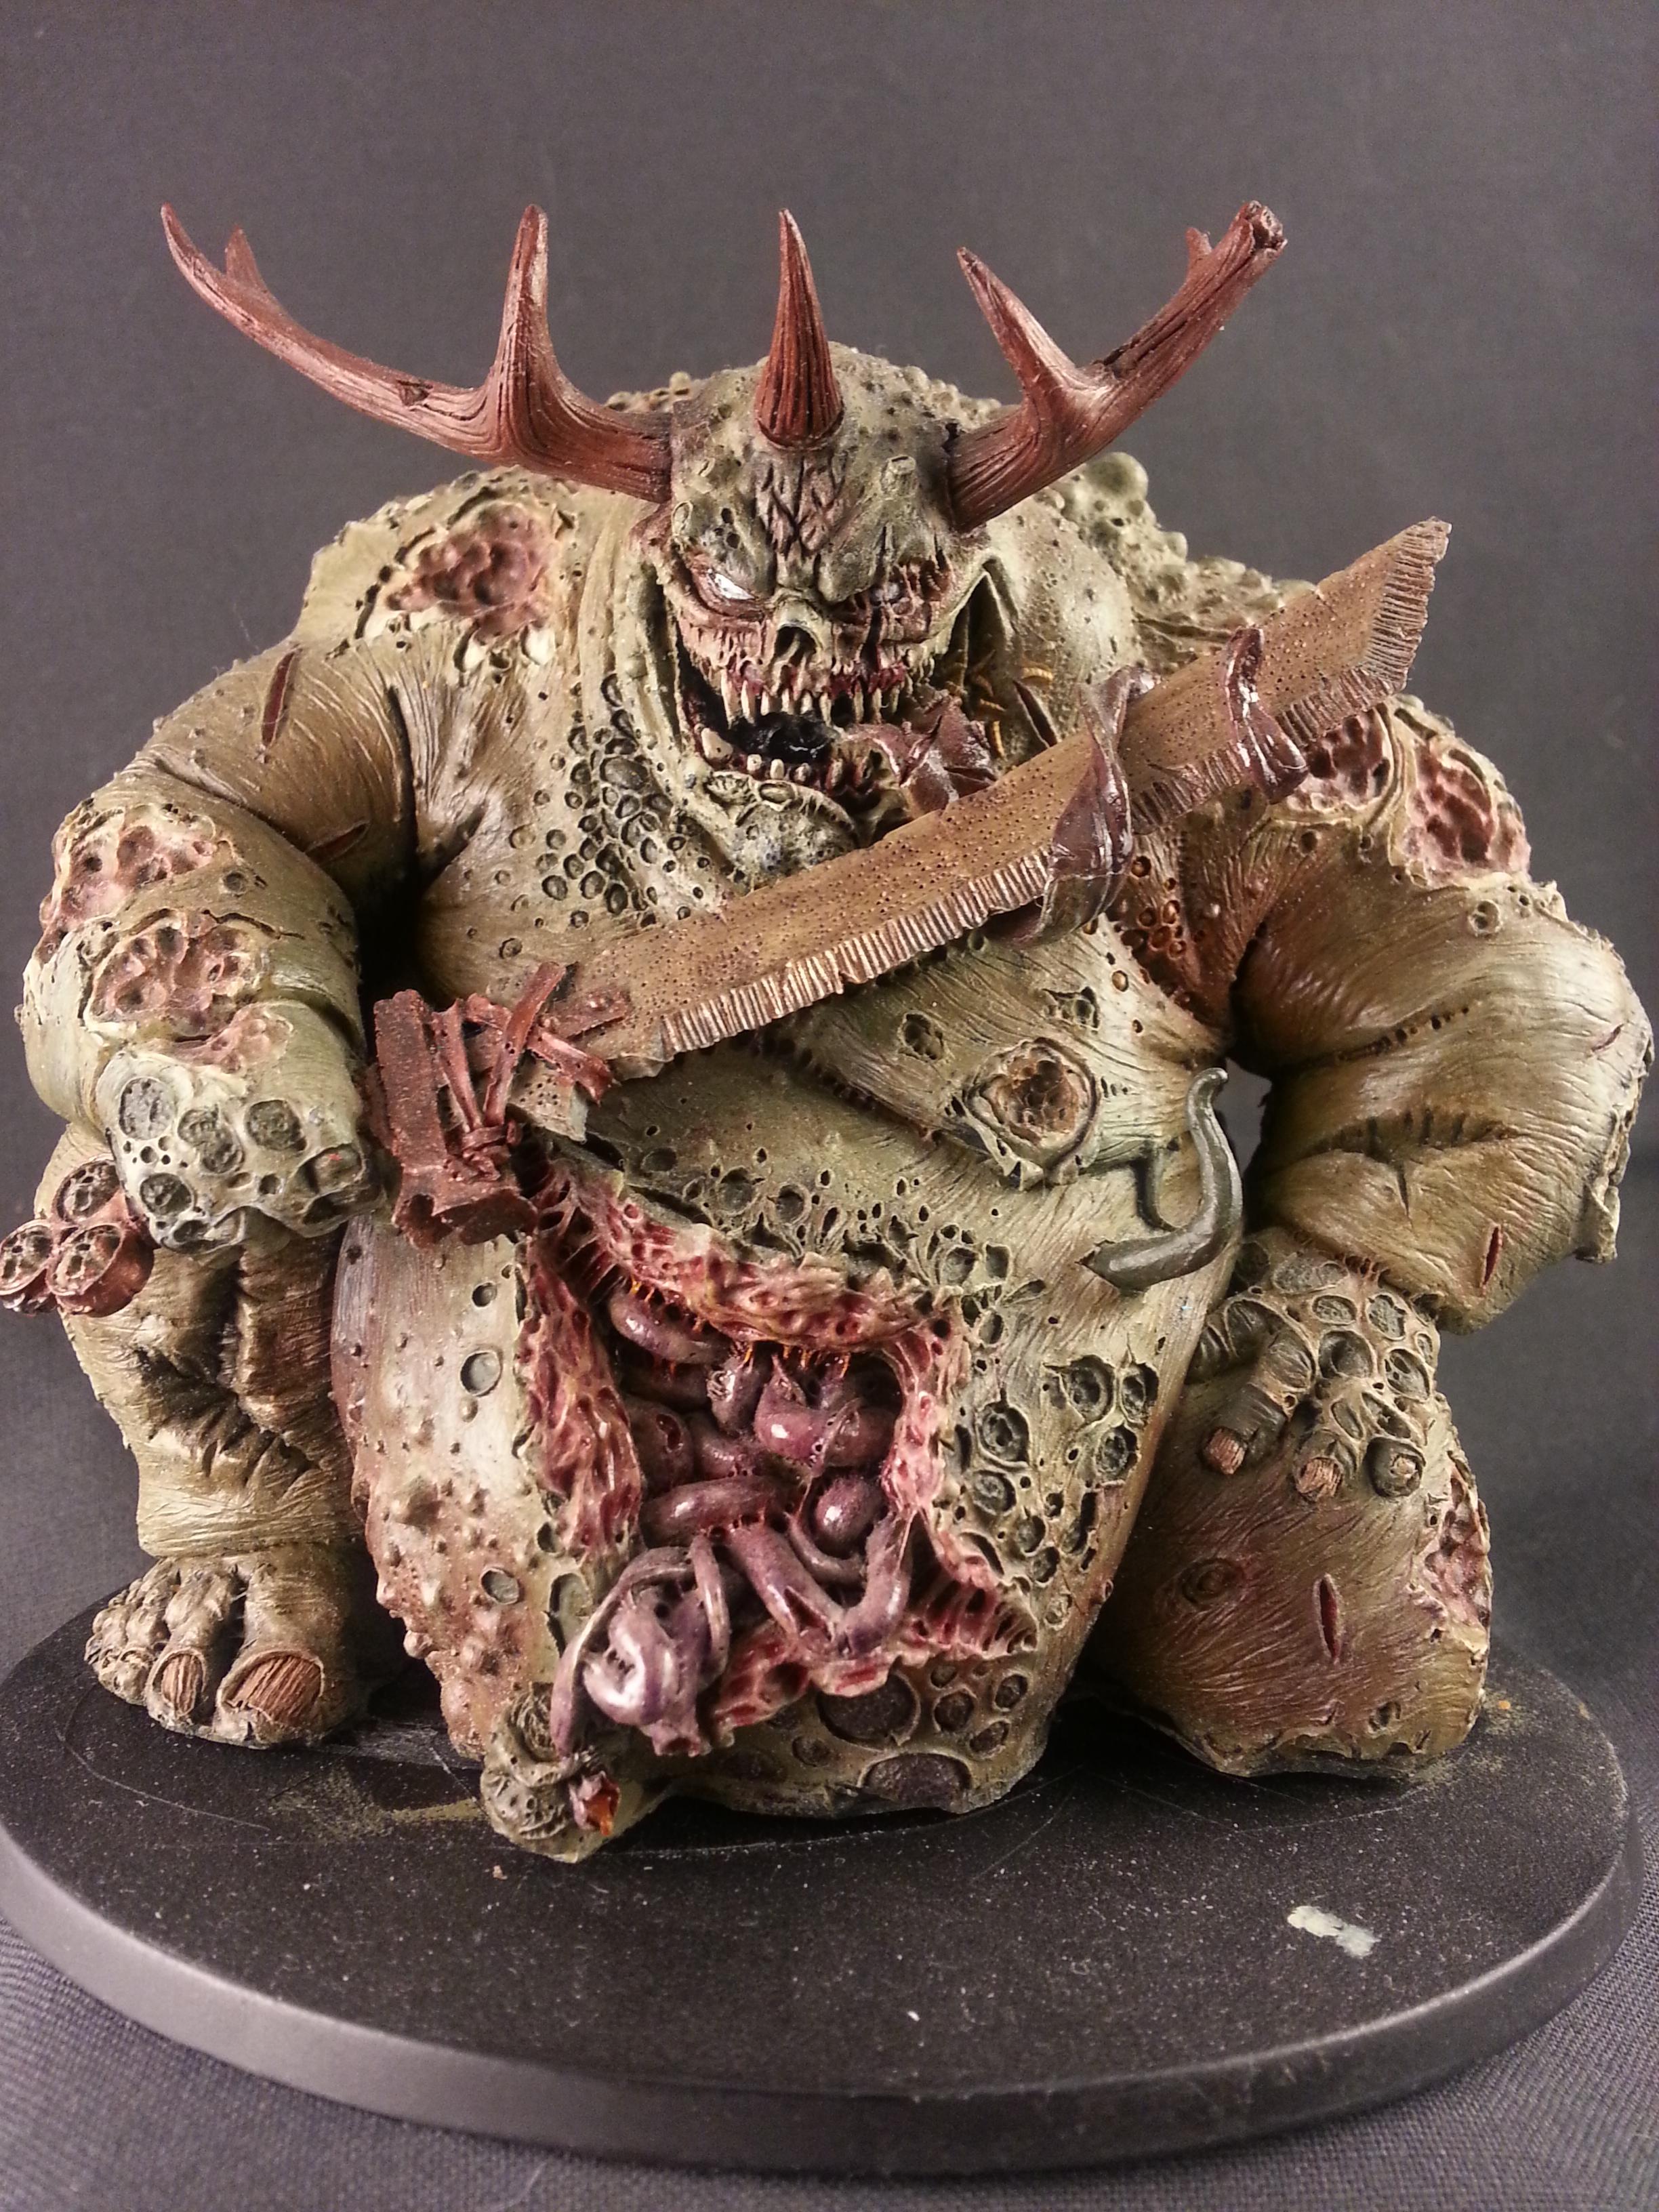 Daemons, Forge World, Greater Unclean One, Guo, Herald, Nurgle, Poop, Portal, Unclean